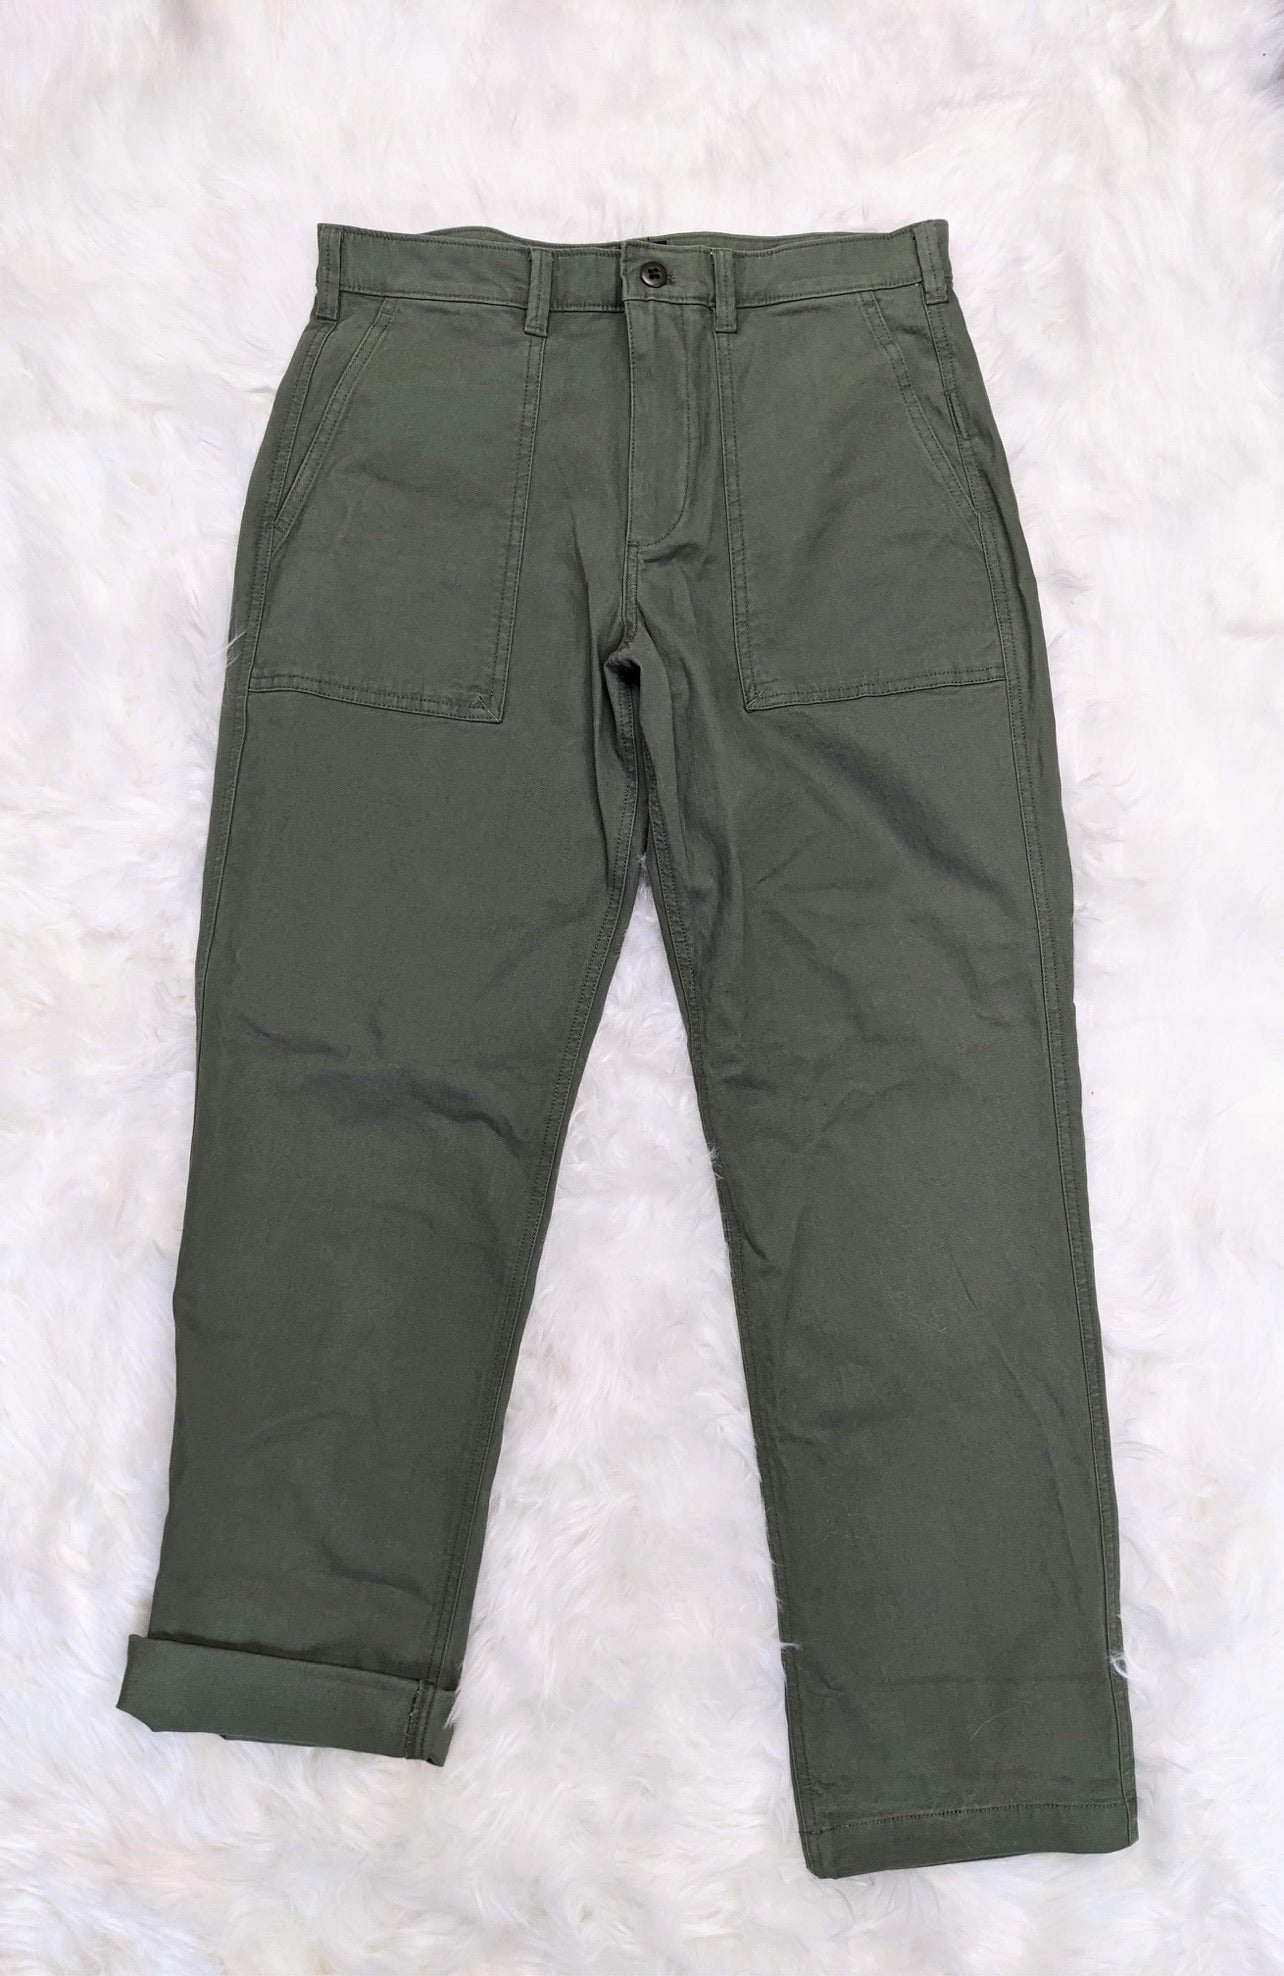 fatigue pants military army style patch pockets olive drab retro style